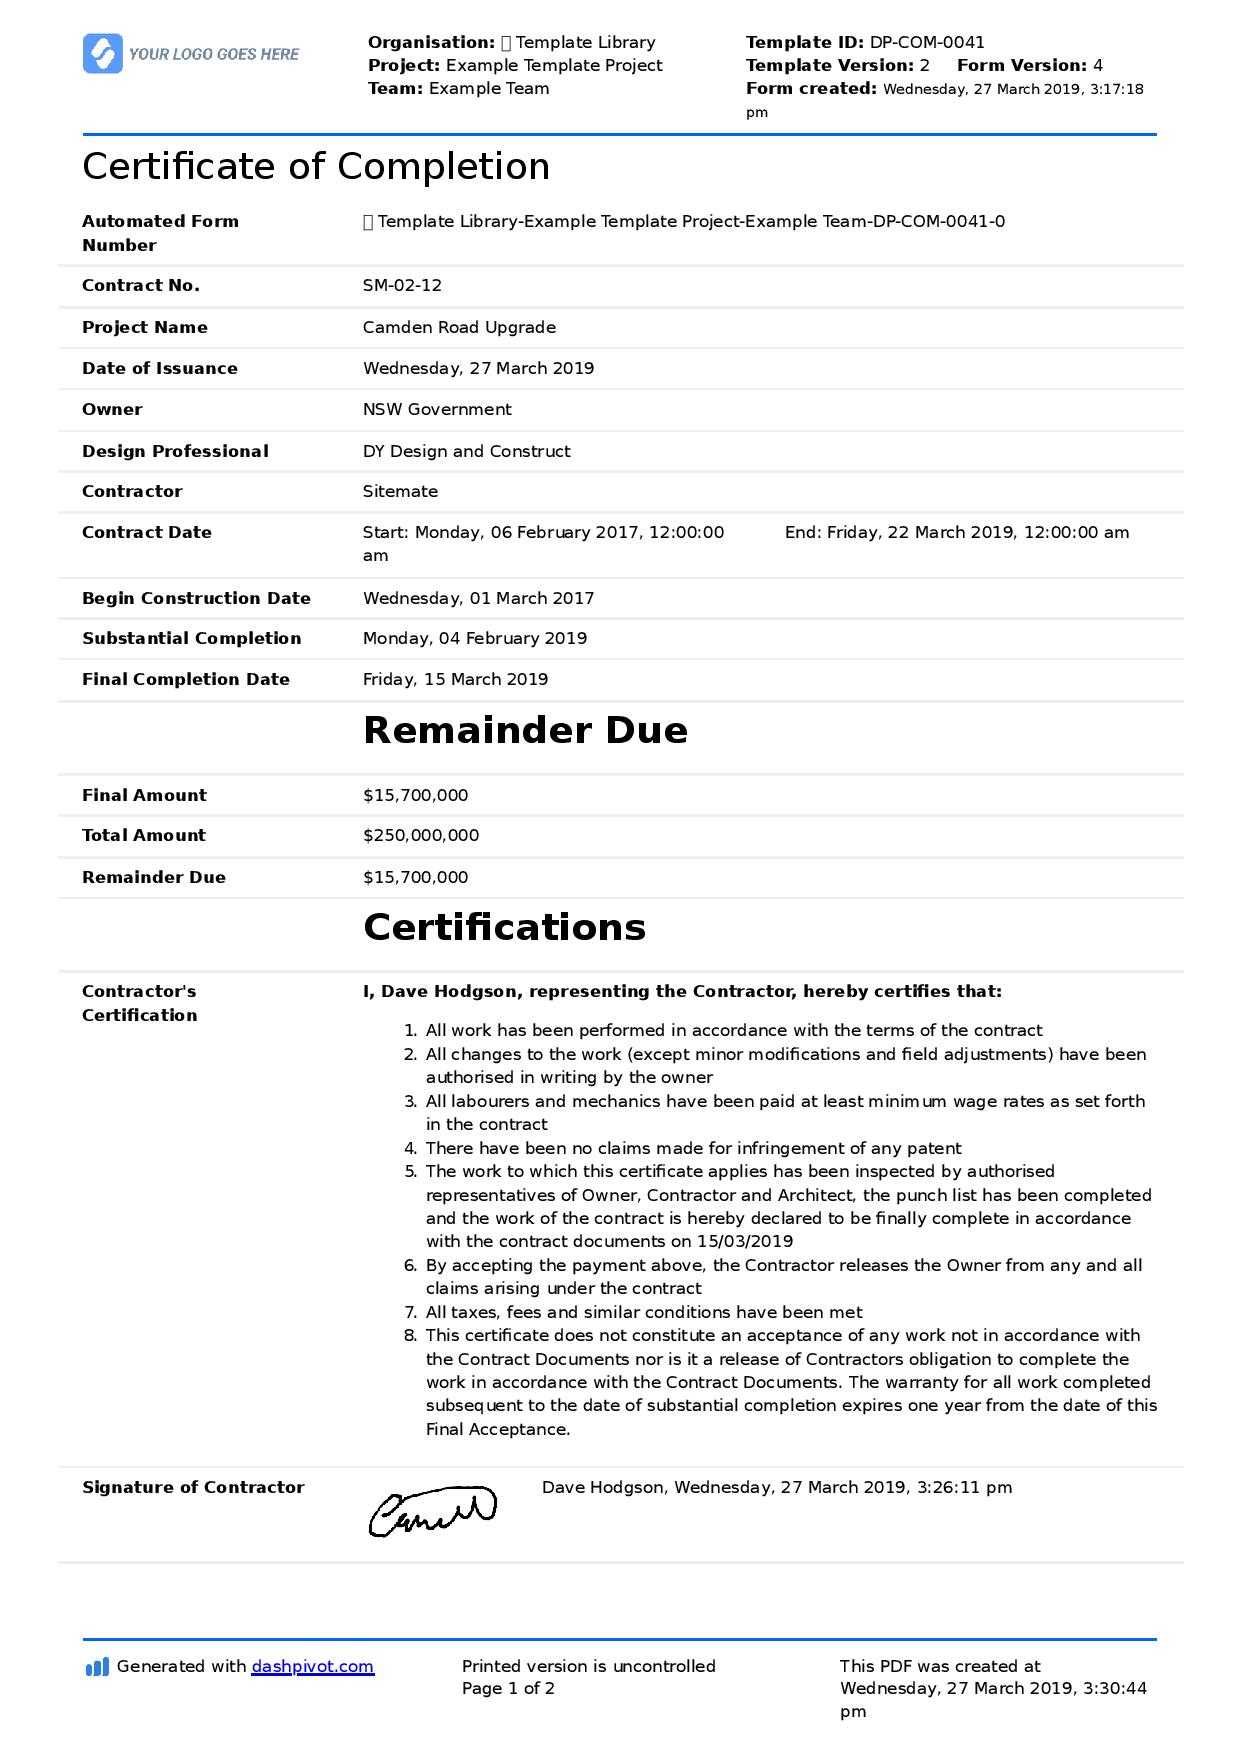 Certificate Of Completion For Construction (Free Template + With Construction Payment Certificate Template